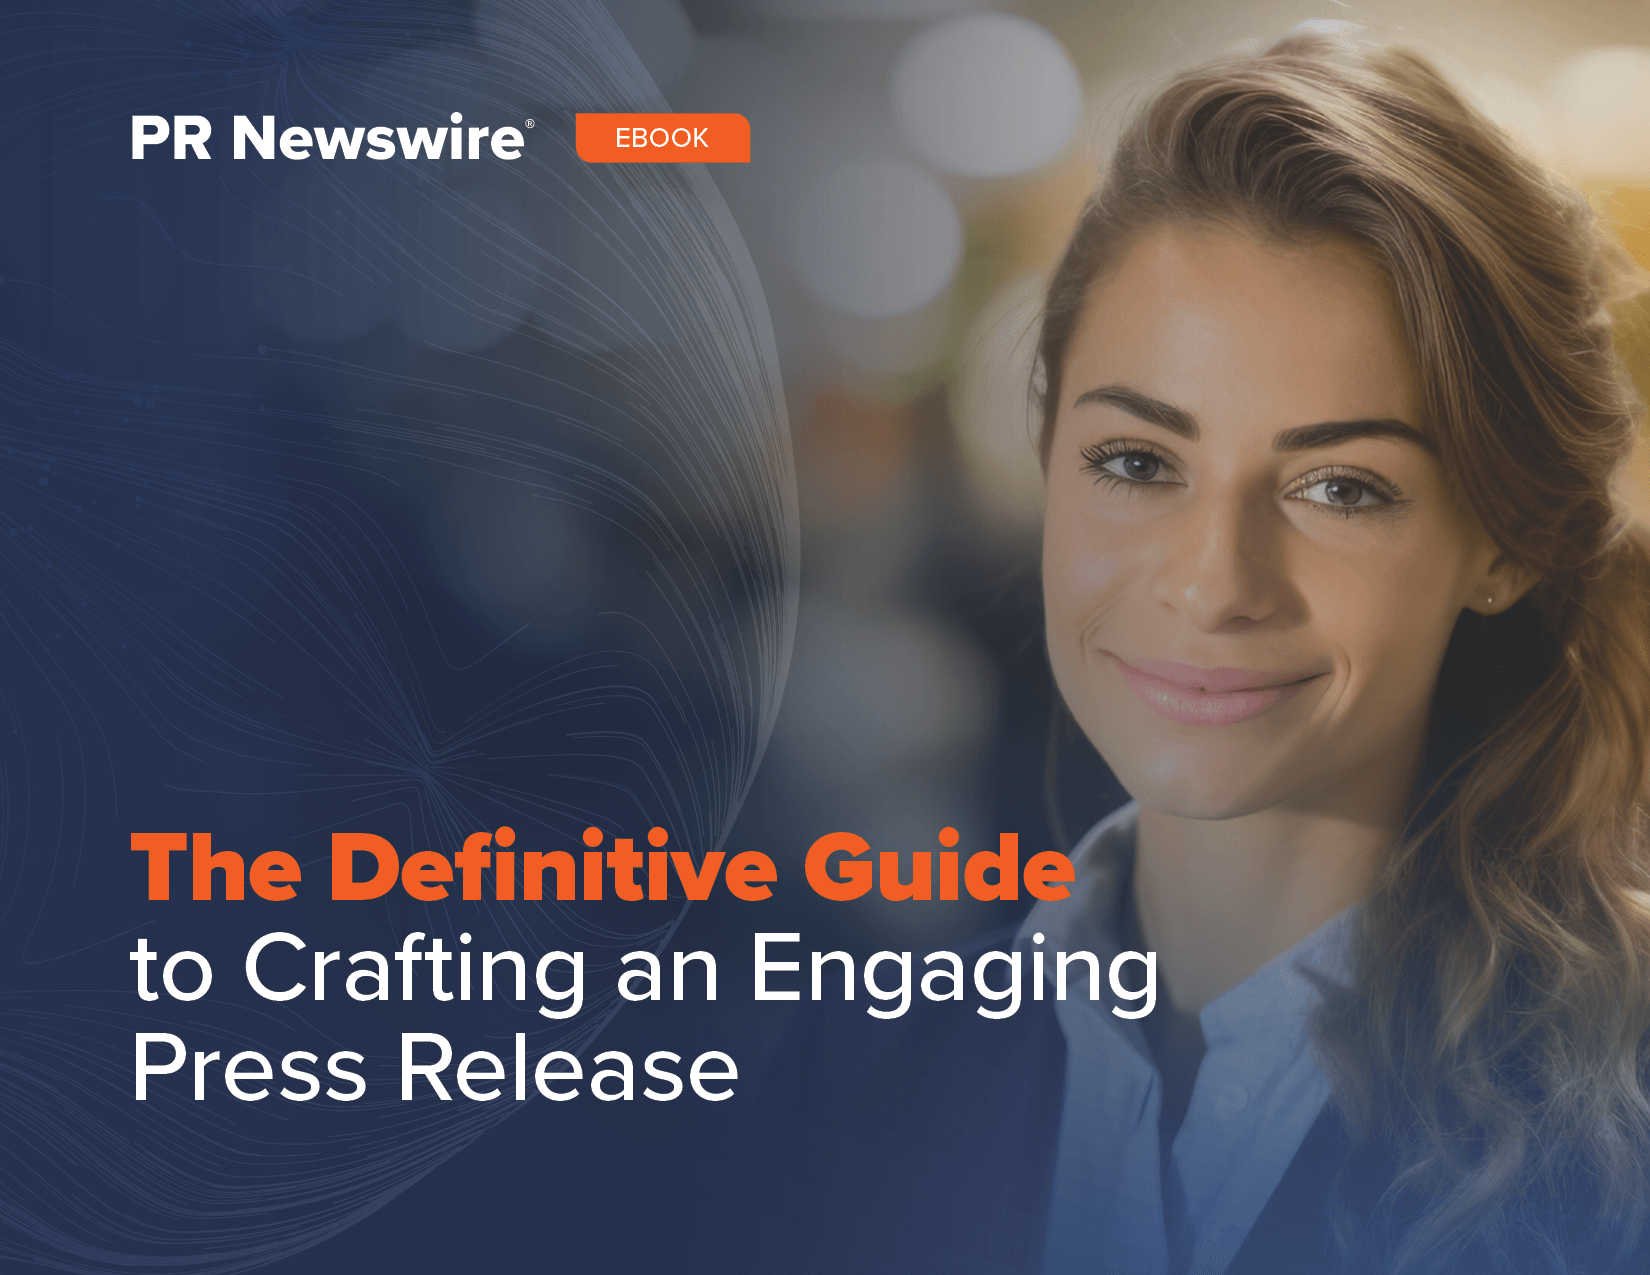 PR Newswire’s Definitive Guide to Crafting an Engaging Press Release